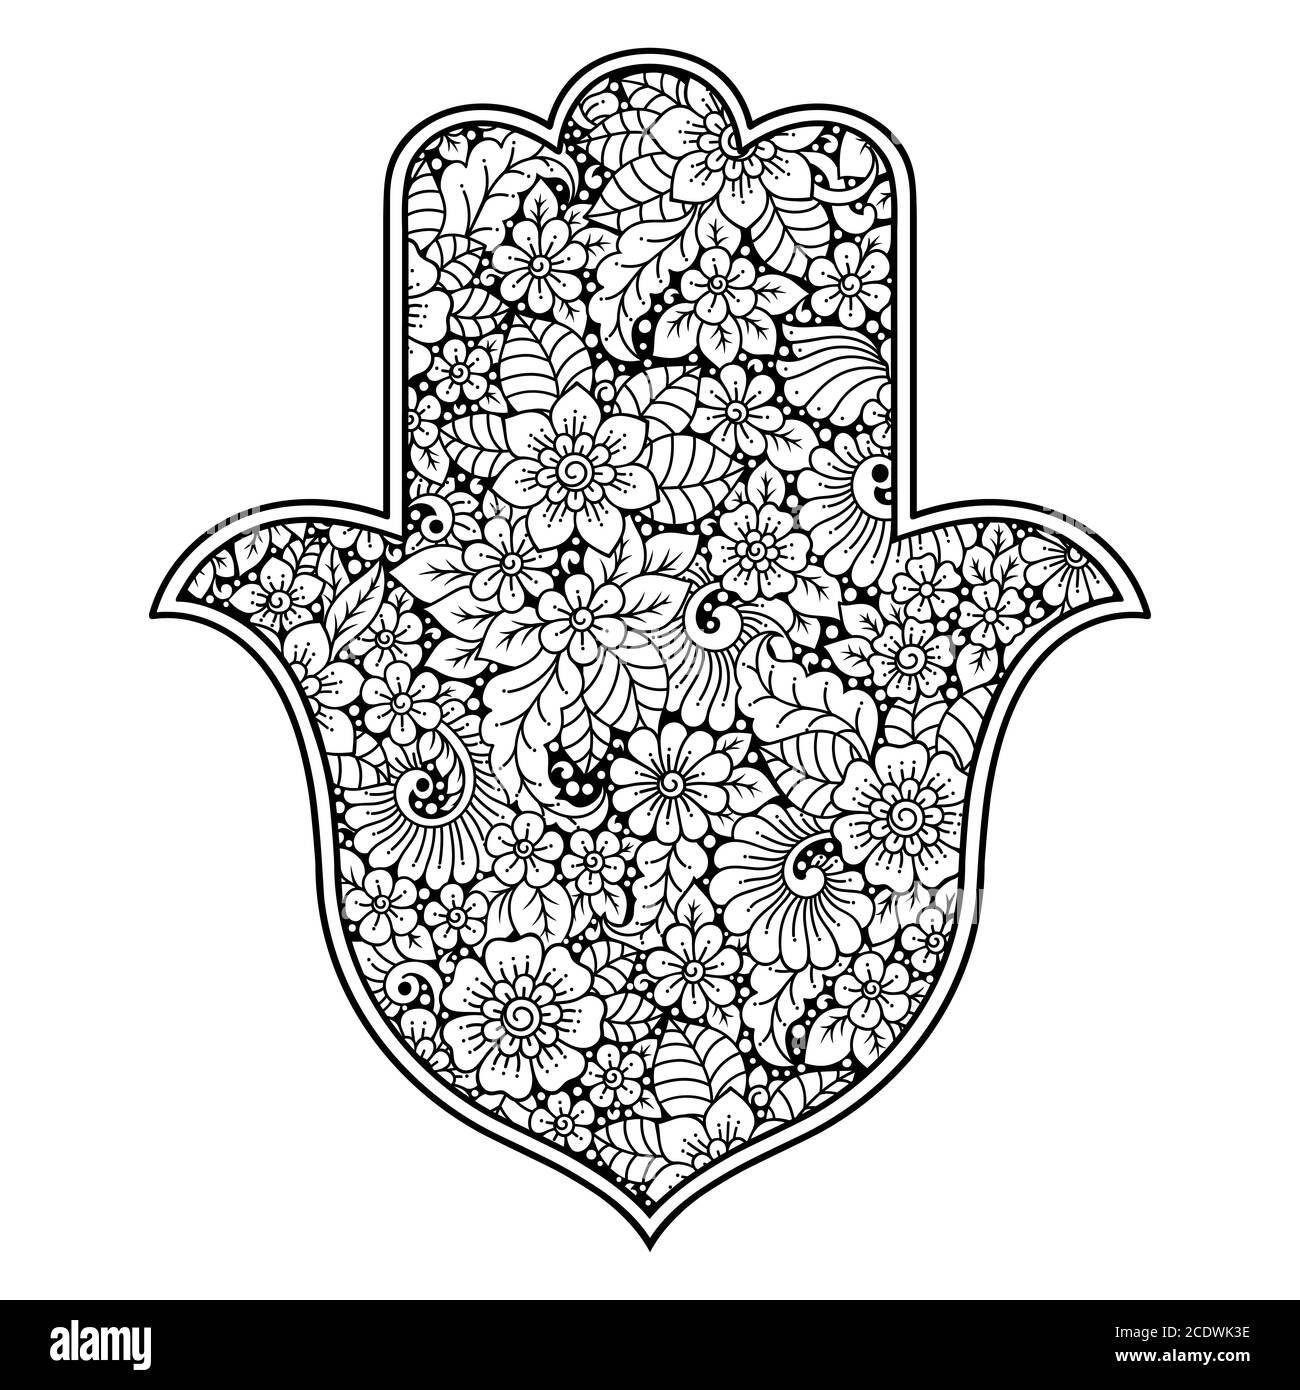 Hamsa hand drawn symbol with flower. Decorative pattern in oriental style for interior decoration and henna drawings. The ancient sign of 'Hand of Fat Stock Vector